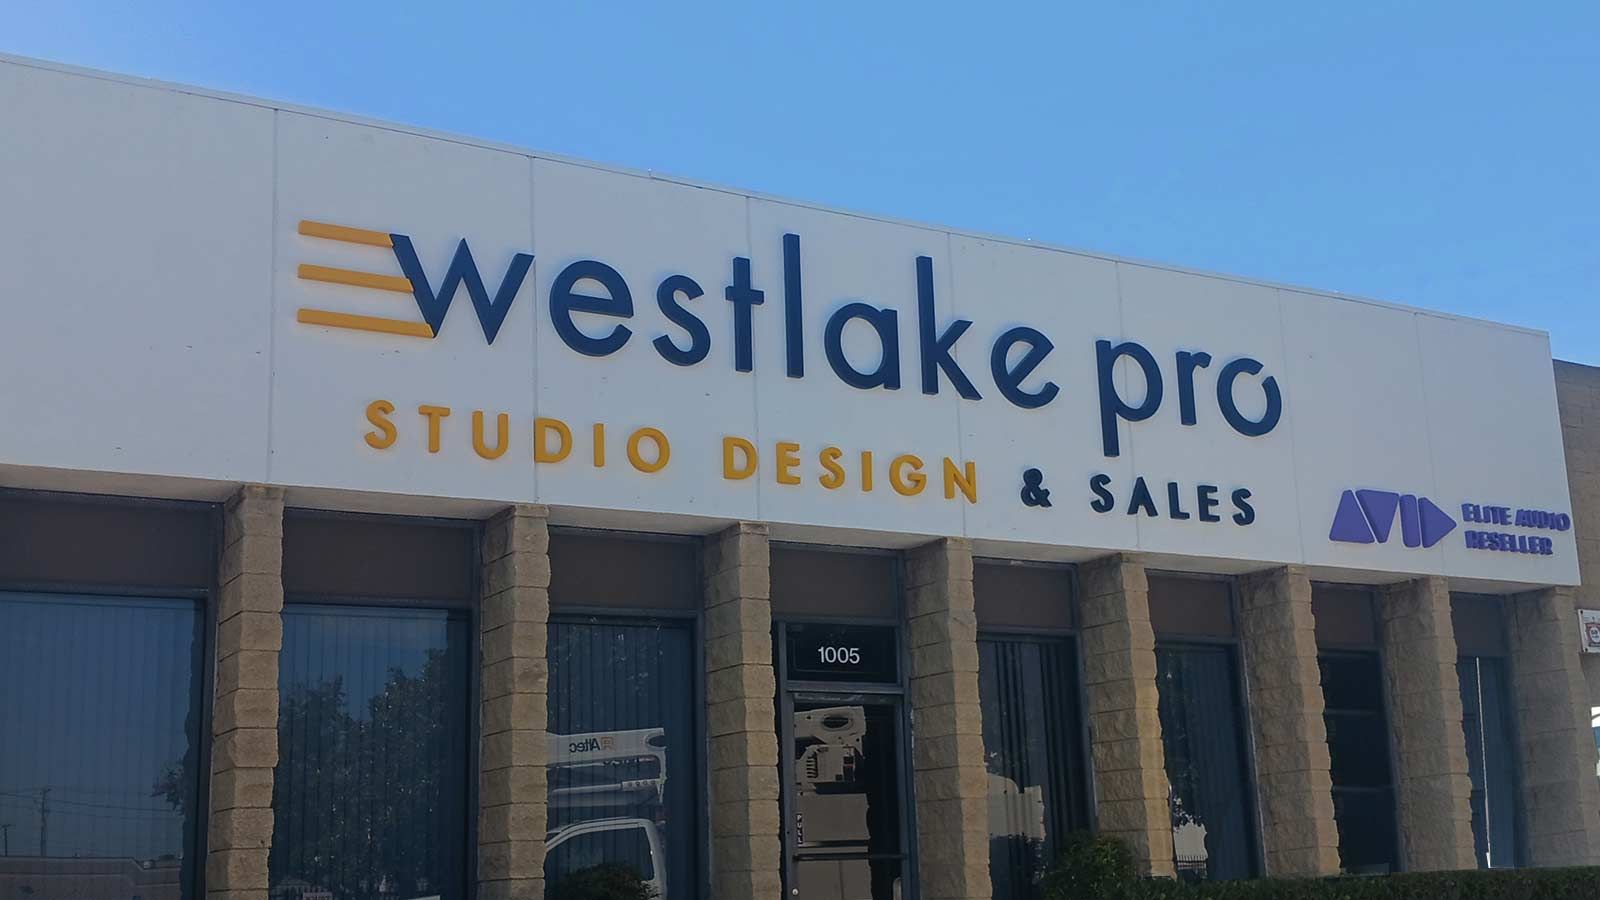 Westlake Pro 3D signs mounted on the facade